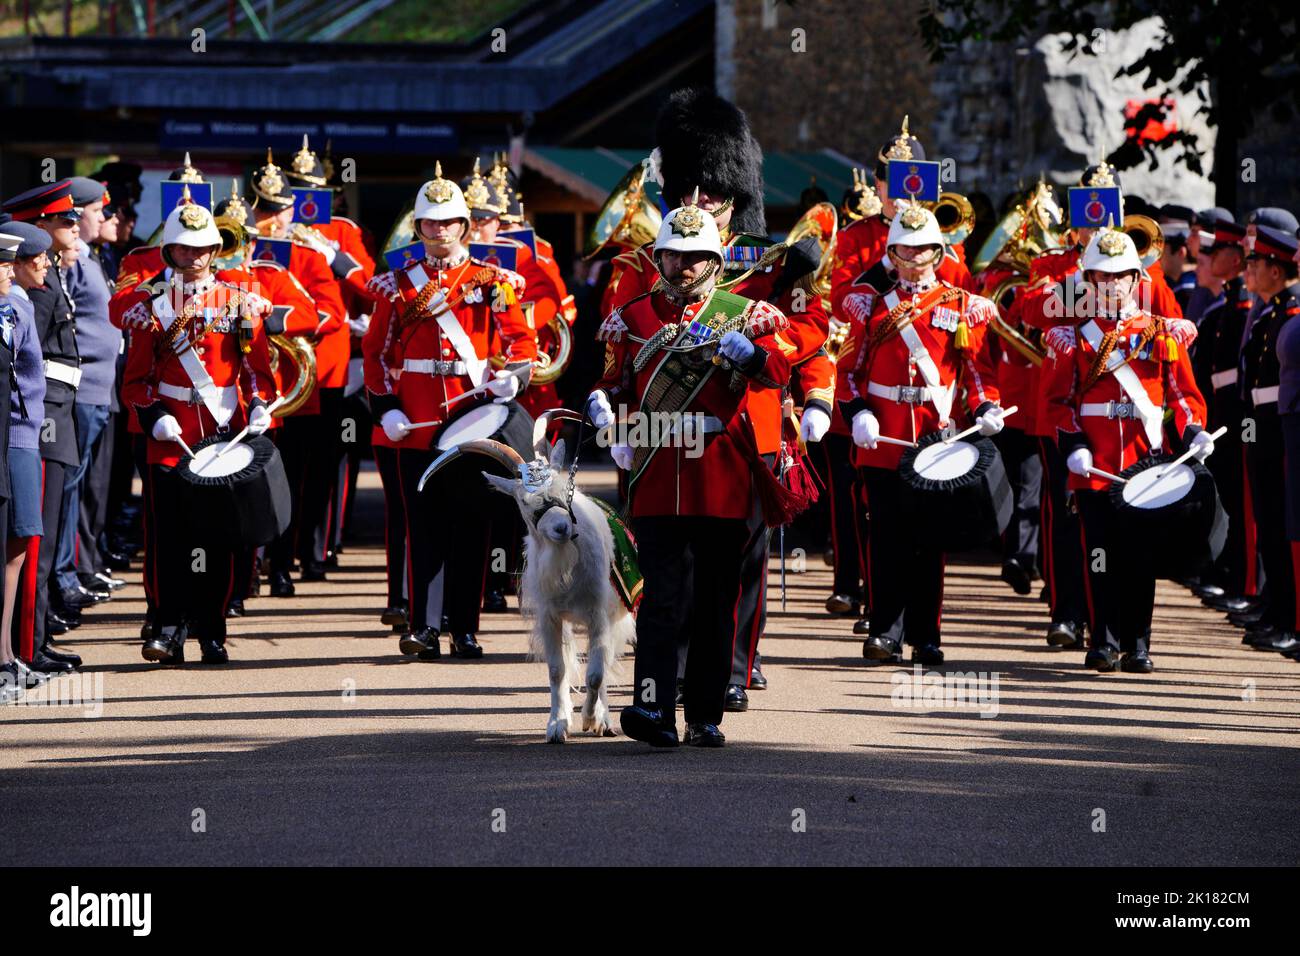 Lance Corporal Shenkin IV, the regimental mascot goat of the Third Battalion of the Royal Welsh regiment with bandsmen, wait for King Charles III to arrive at Cardiff Castle in Wales, Britain. September 16, 2022. Ben Birchall/Pool via REUTERS Stock Photo